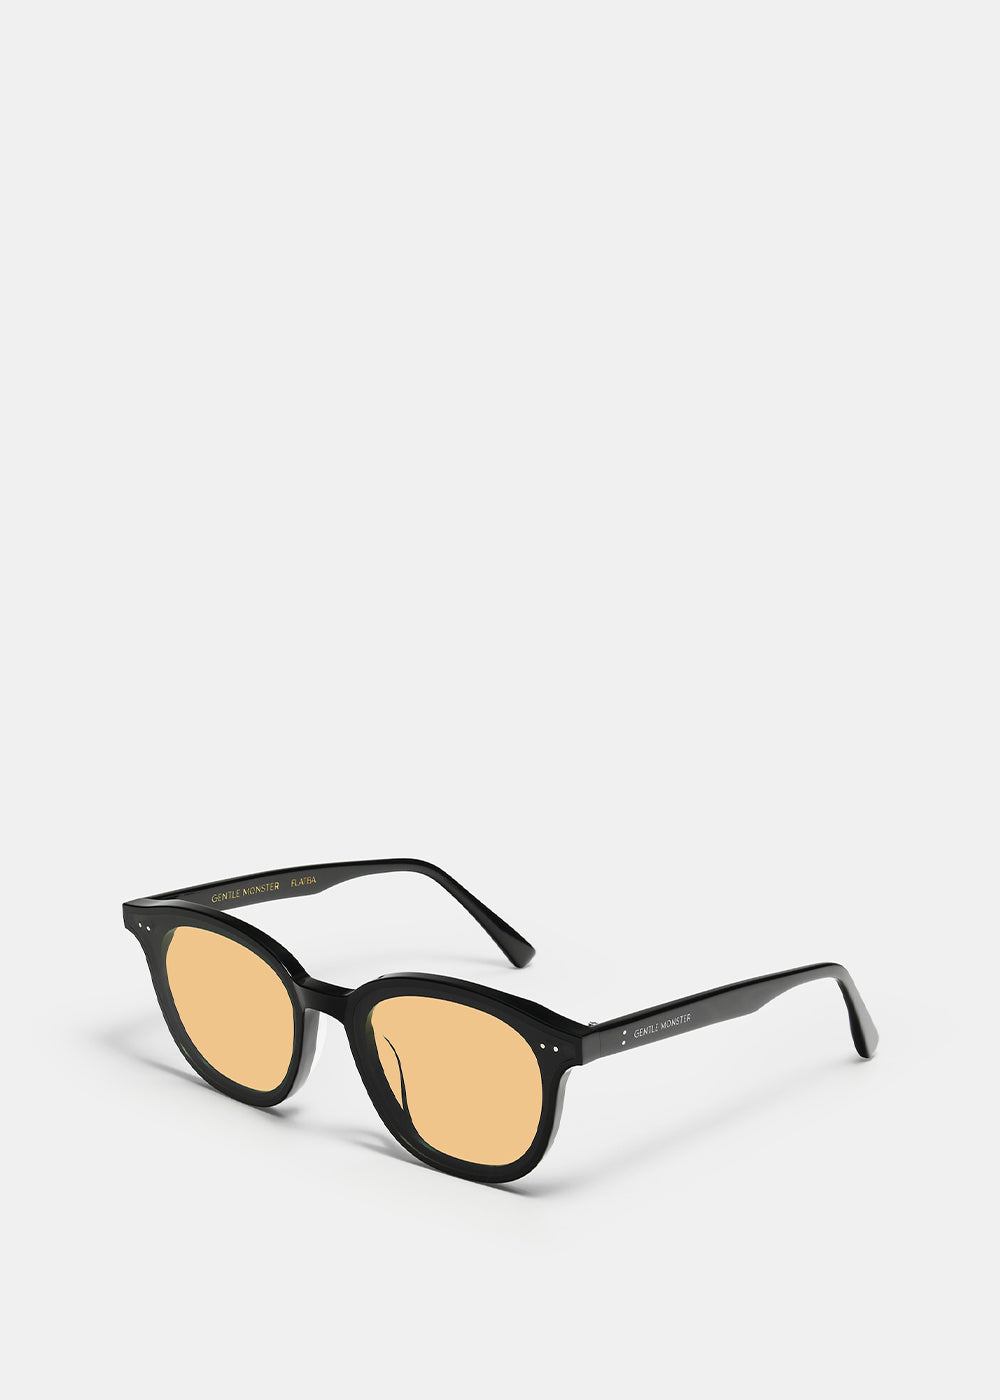 LANG 01(OR) Sunglasses | LEISURE CENTER